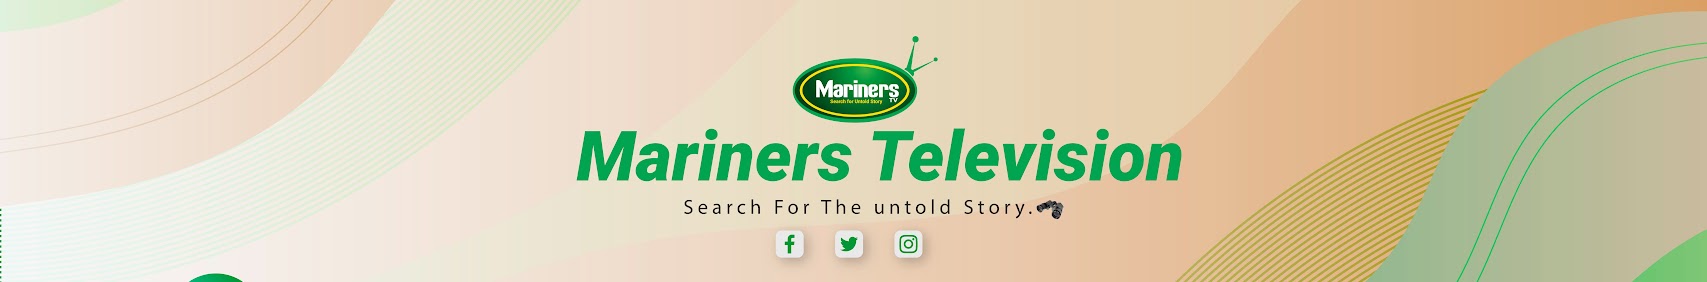 Welcome to Mariners Group Bangladesh. Mariners Food & Agro Limited (MFA Limited) was established in 2018. Peawall, Matree, Irich Our Main Brand. Mariners peanuts. Safe food manufacturer Mariners Food & Agro LTD, Trusted safe food manufacturer, ensuring quality, freshness, and hygiene for consumers' well-being and satisfaction. Provision supply to Ships "Mariners Food & Agro LTD, Expertly catering to ships' needs with a wide array of provisions, ensuring reliable and timely supply for smooth sailing journeys." Depot Distributors Among Mariners "Mariners Food & Agro LTD, The leading depot distributors among Mariners, providing efficient logistics, diverse product range, and exceptional service for seamless supply chain solutions." Business in Transport Sector "Mariners Food & Agro LTD, Pioneering success in the transport sector, ensuring smooth and timely delivery of goods, setting new standards for reliability and customer satisfaction." Agro Project "Mariners Food & Agro LTD's Agro Project, A sustainable and innovative initiative, cultivating premium crops, fostering agricultural development, and contributing to food security and prosperity." Export "Mariners Food & Agro LTD, Thriving in the global market with high-quality exports, expanding reach and sharing premium products worldwide, while ensuring customer delight."